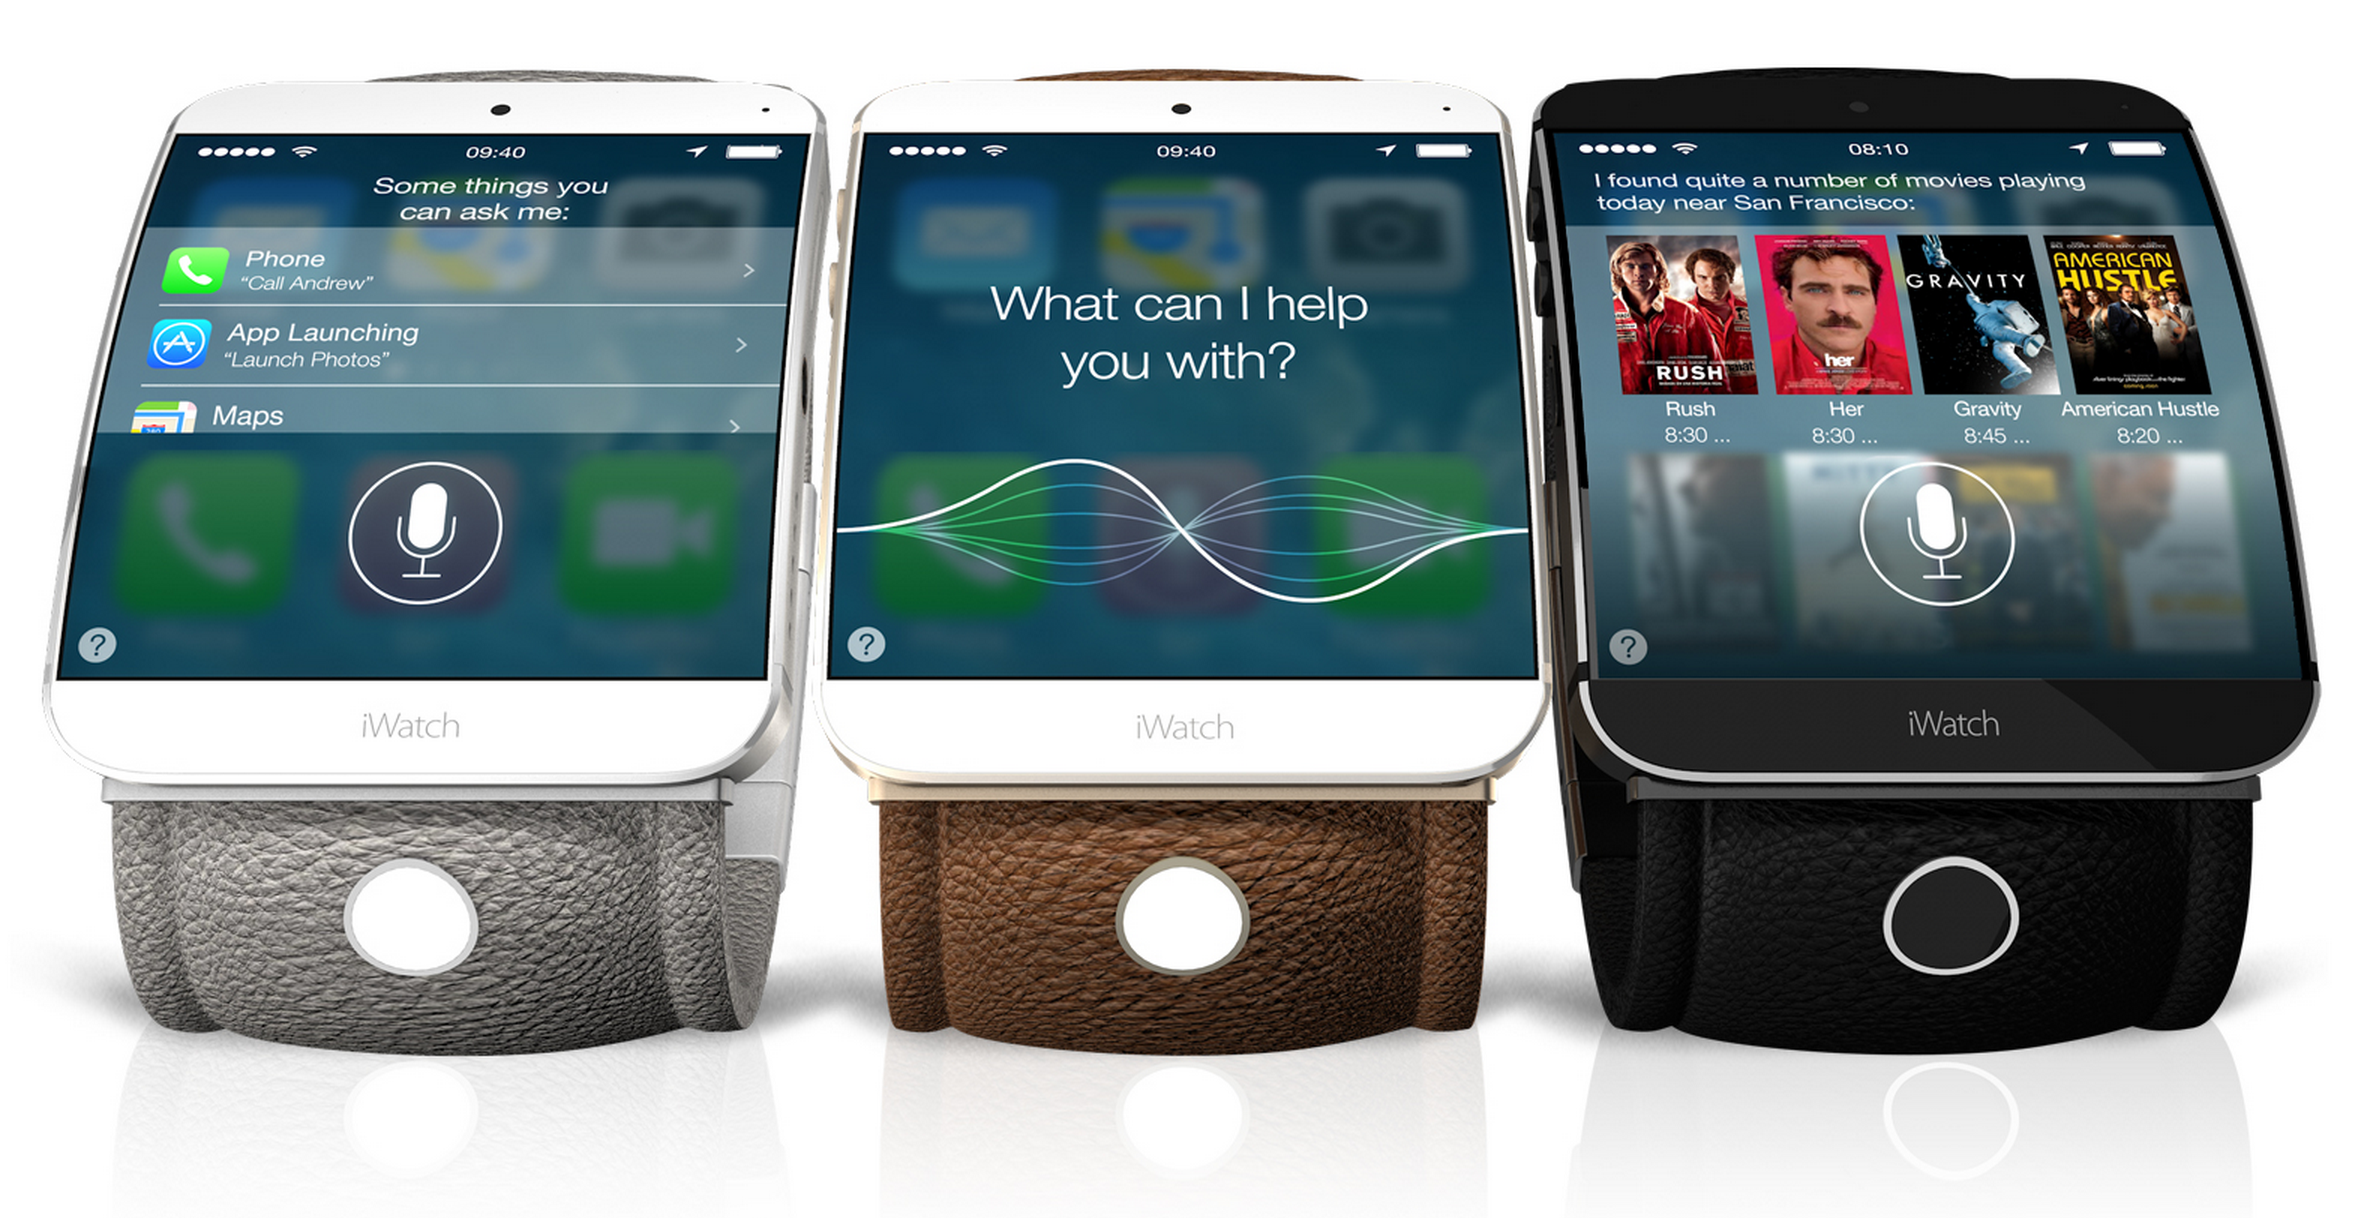 One of many iWatch concepts.